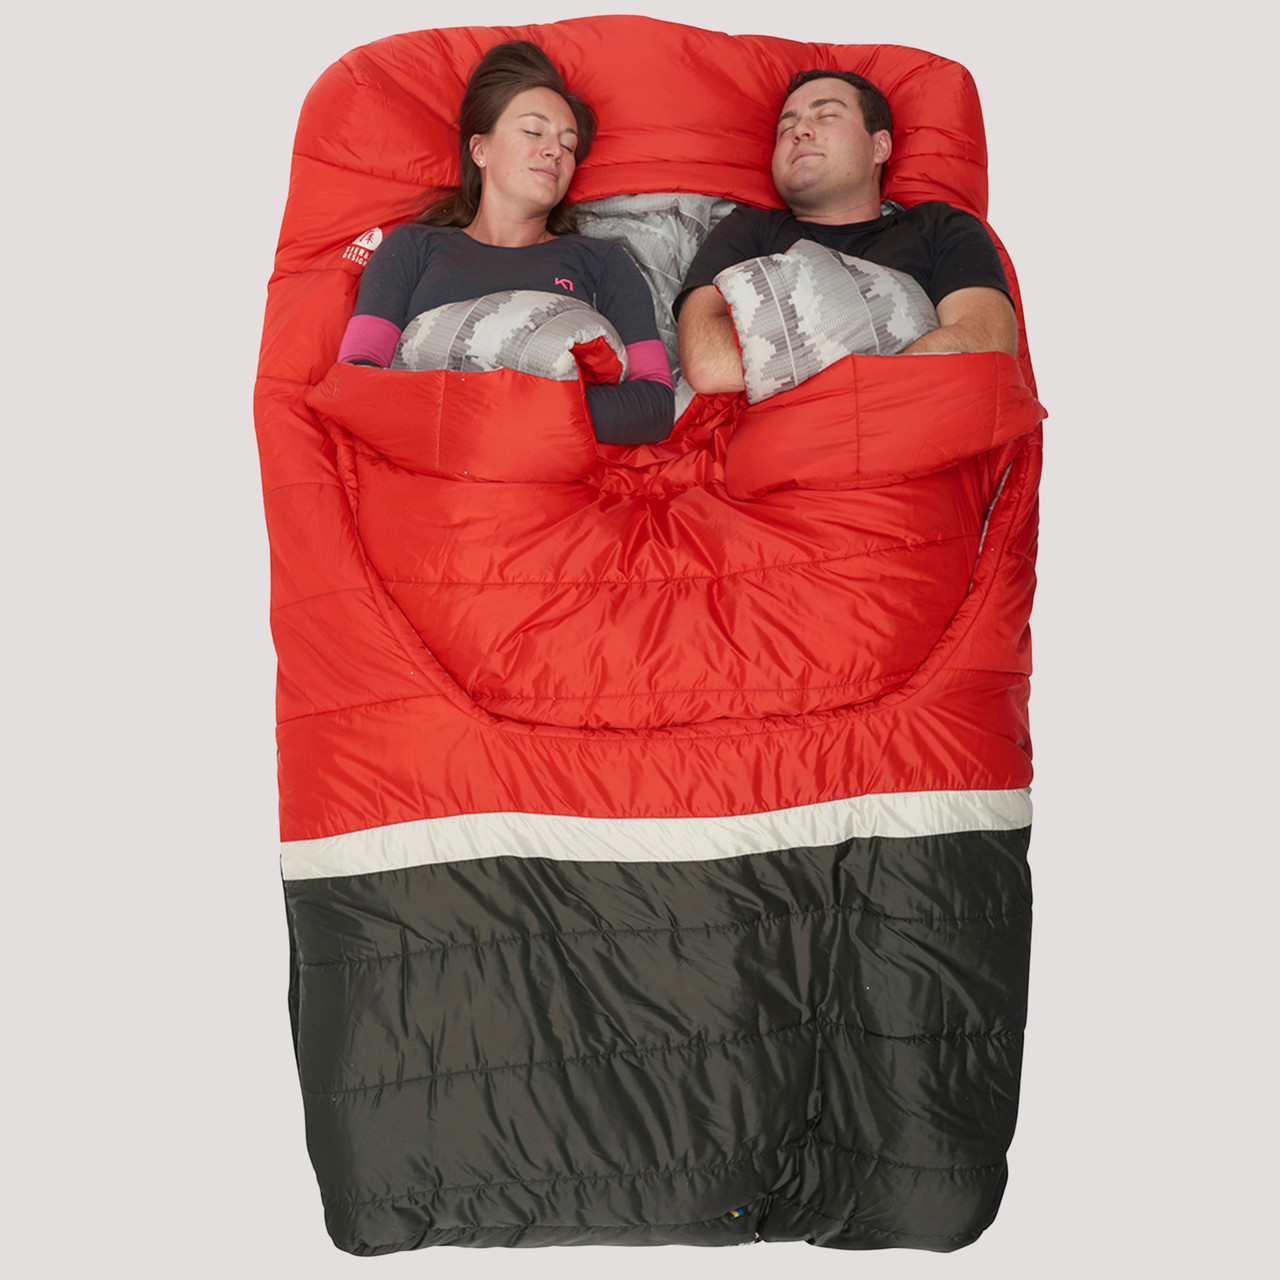 RhinoKraft Best Large Size Couple Sleeping Bag for Winter Camping and  Trekking